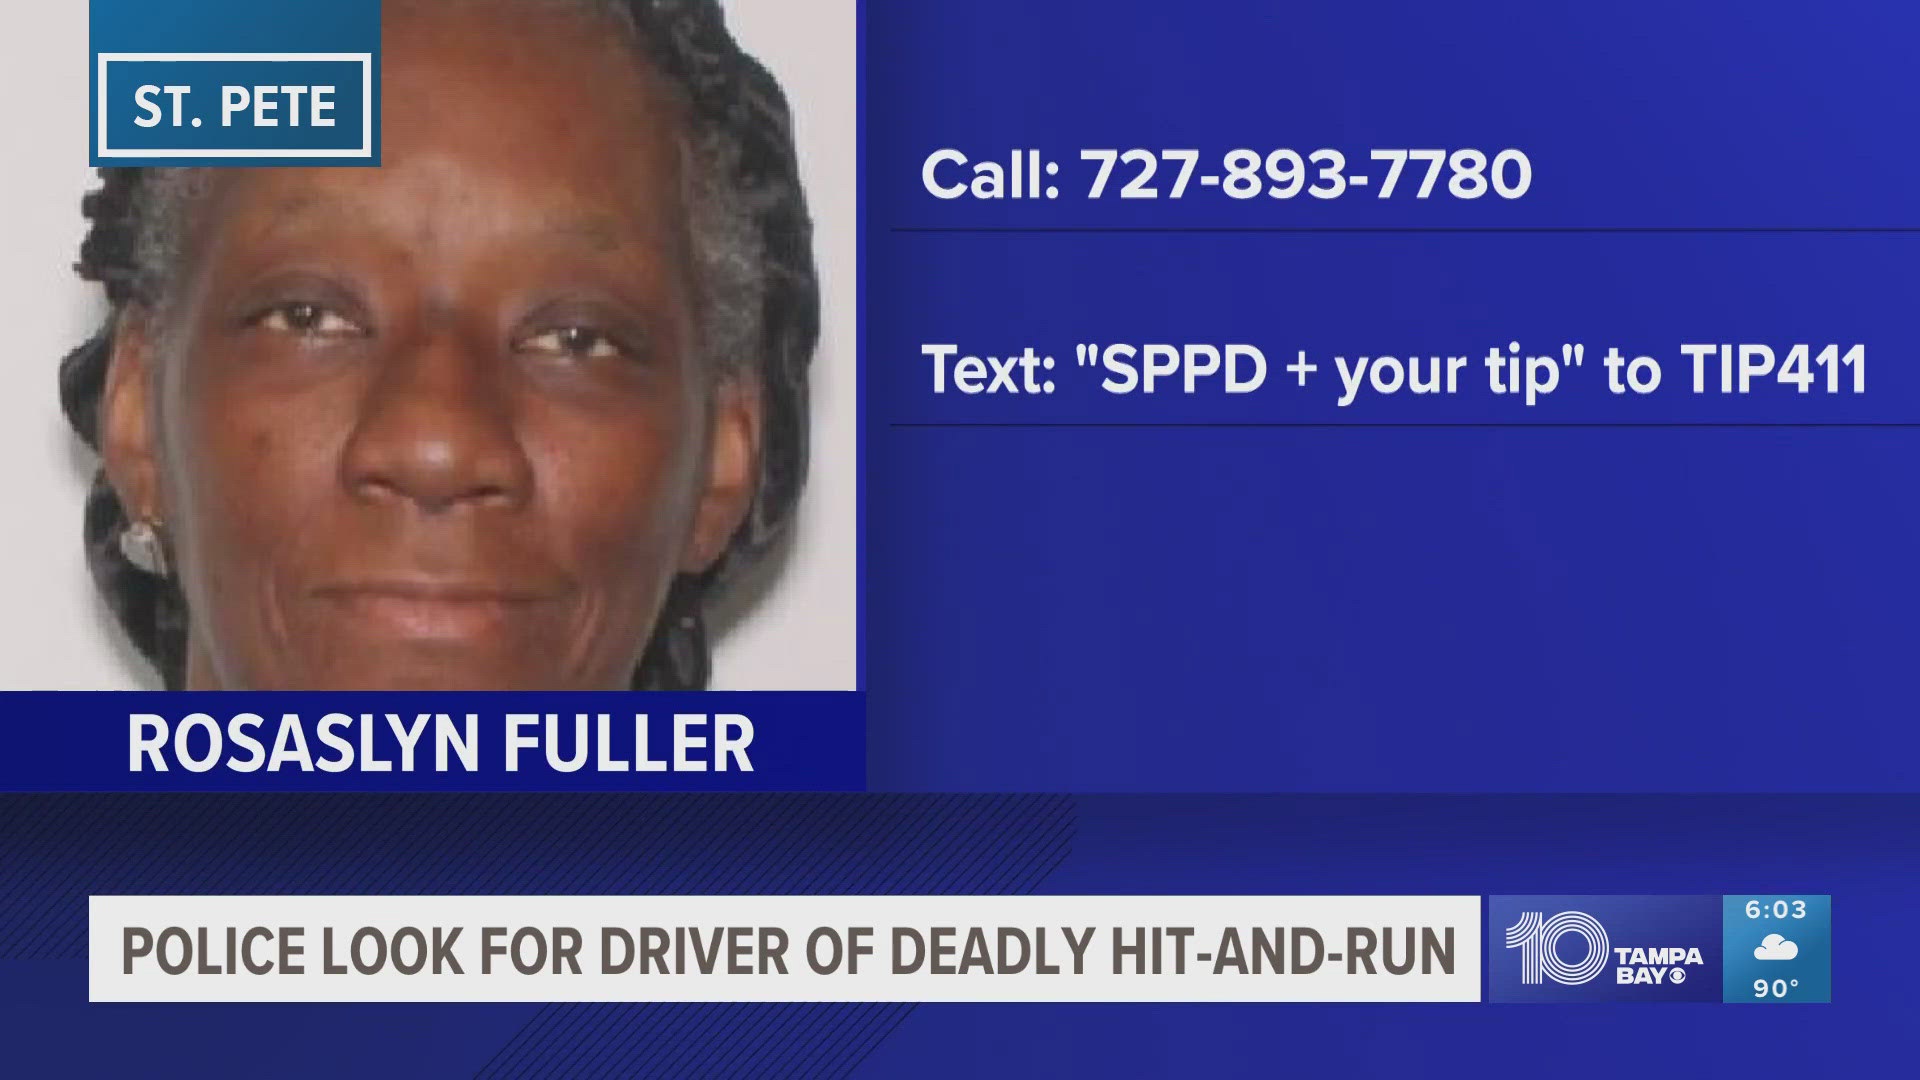 A 62-year-old woman was killed and police are looking for another woman who they think has information about the incident.